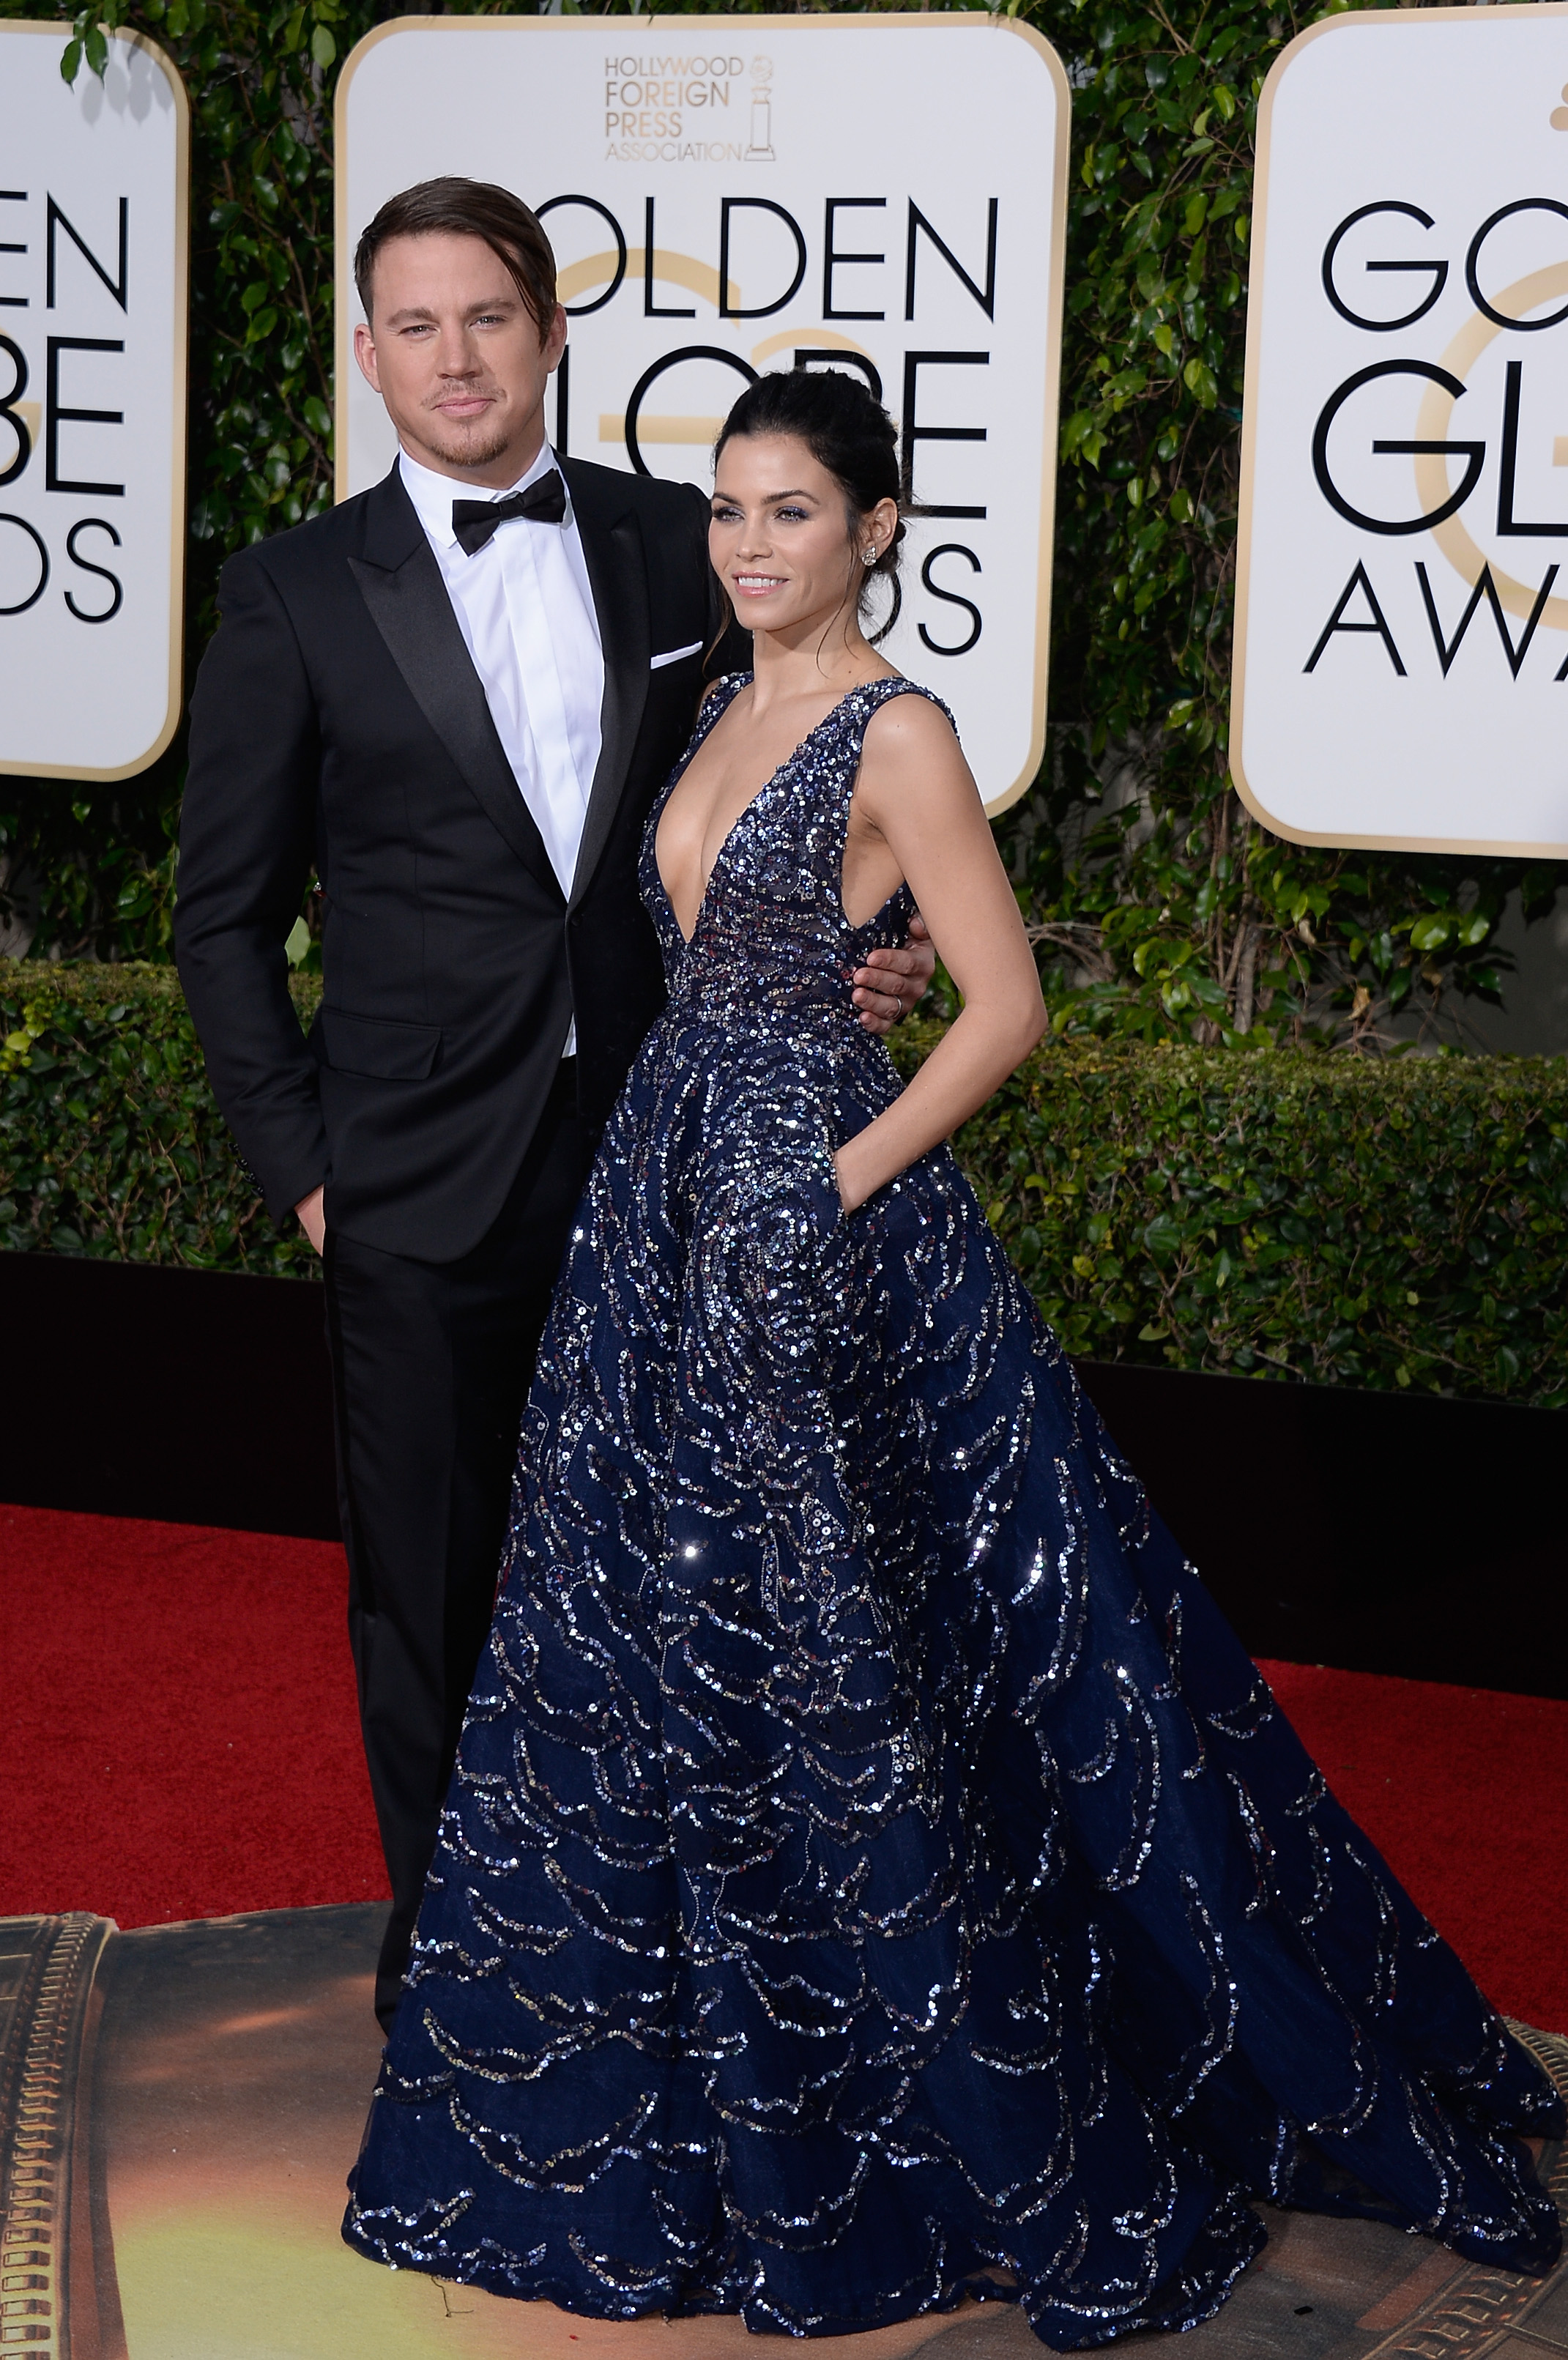 Channing Tatum and Jenna Dewan Tatum arrive to the 73rd Annual Golden Globe Awards on Jan. 10, 2016 in Beverly Hills.